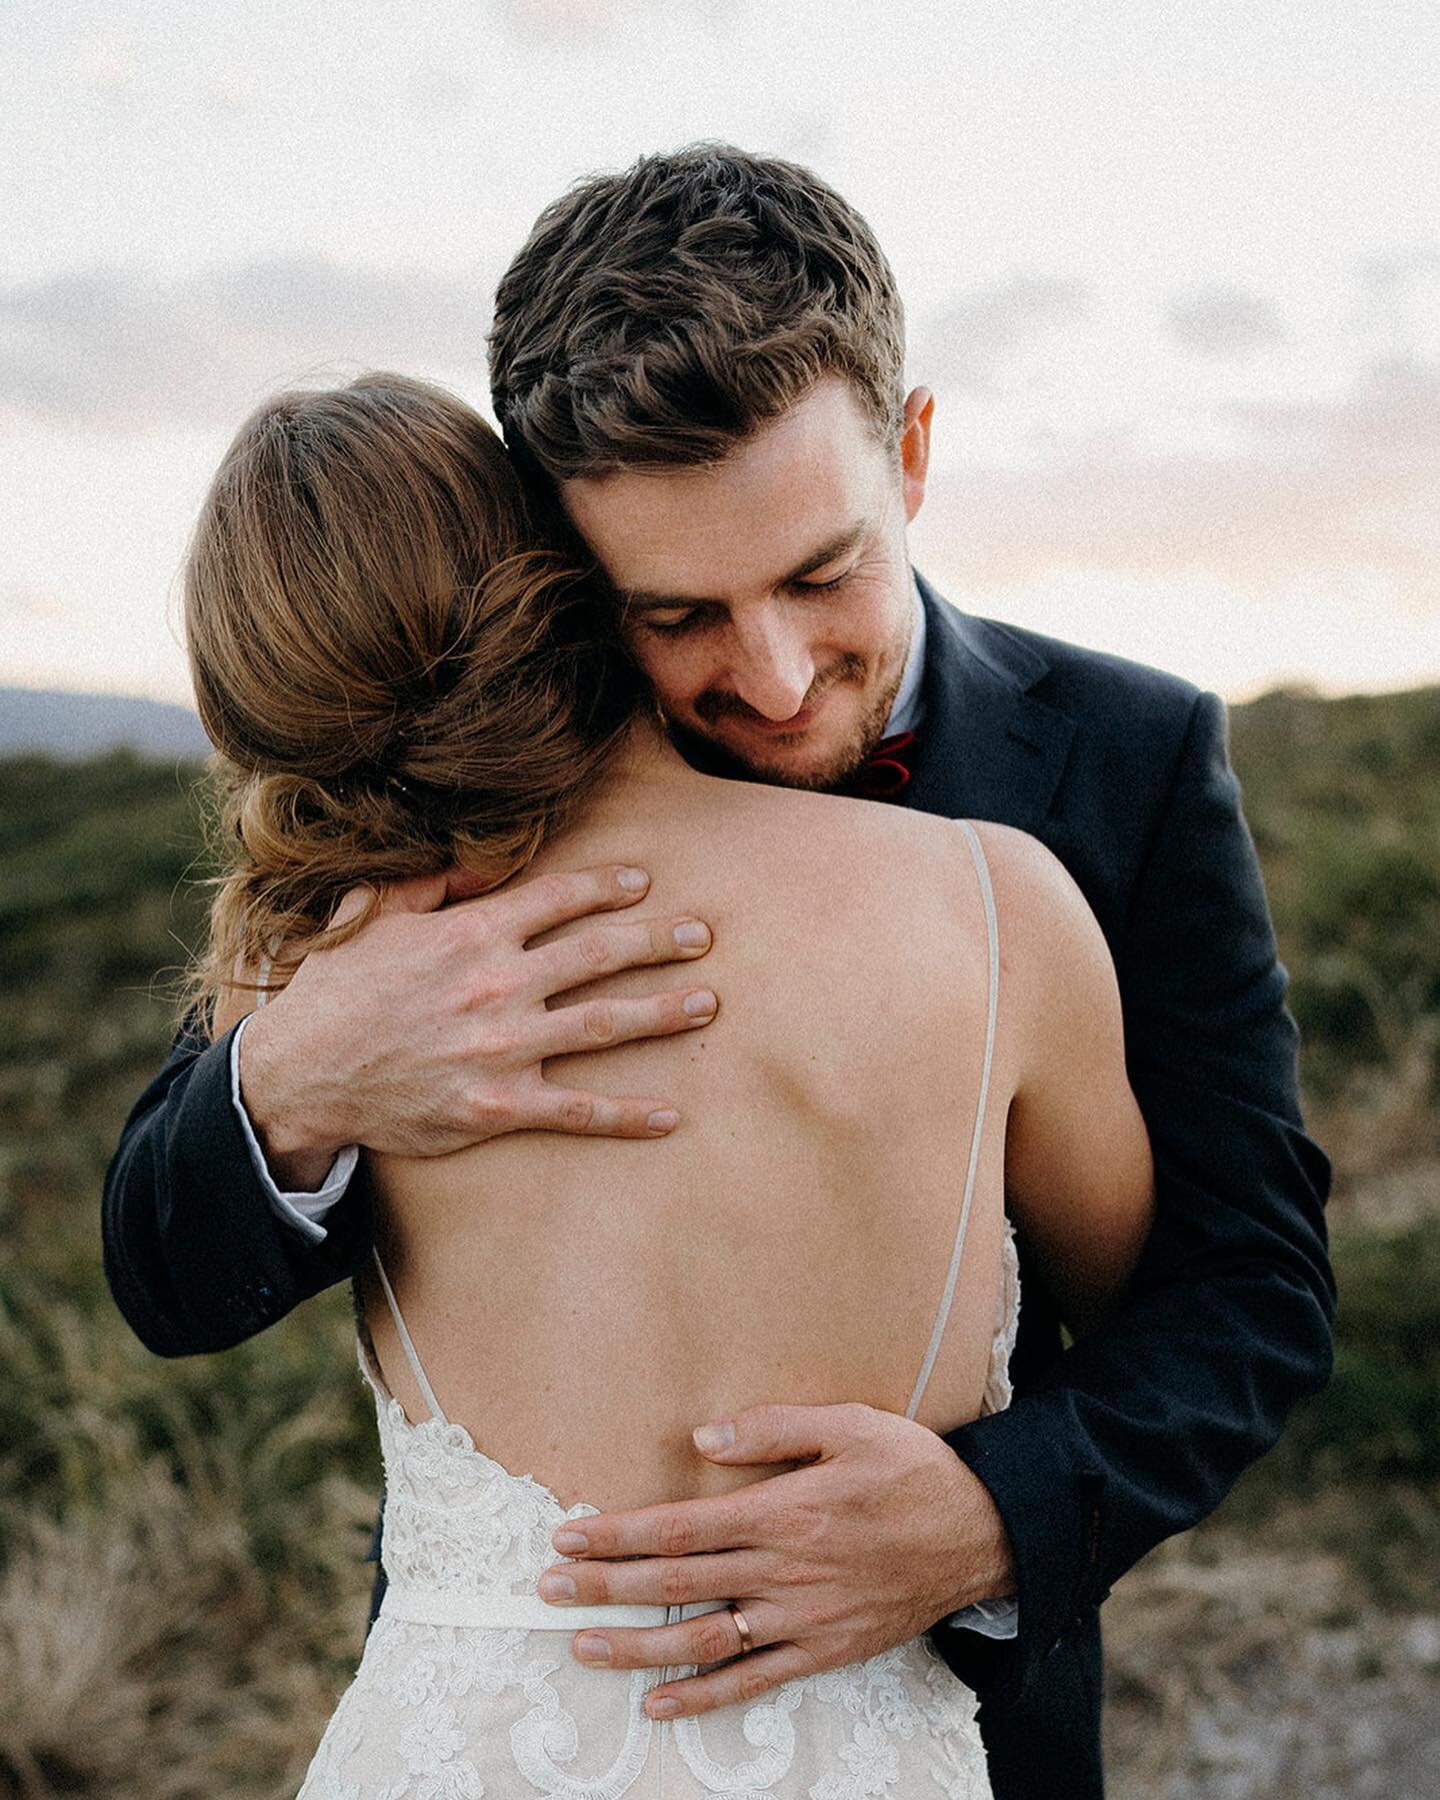 &ldquo;Happiness in marriage is not the result of random charm, or meeting and marrying the perfect guy. It&rsquo;s the result of consistent intentional choices that say &ldquo;I still choose you. I still value you.&rdquo;&rdquo;
Anon
.
.
Katie and N